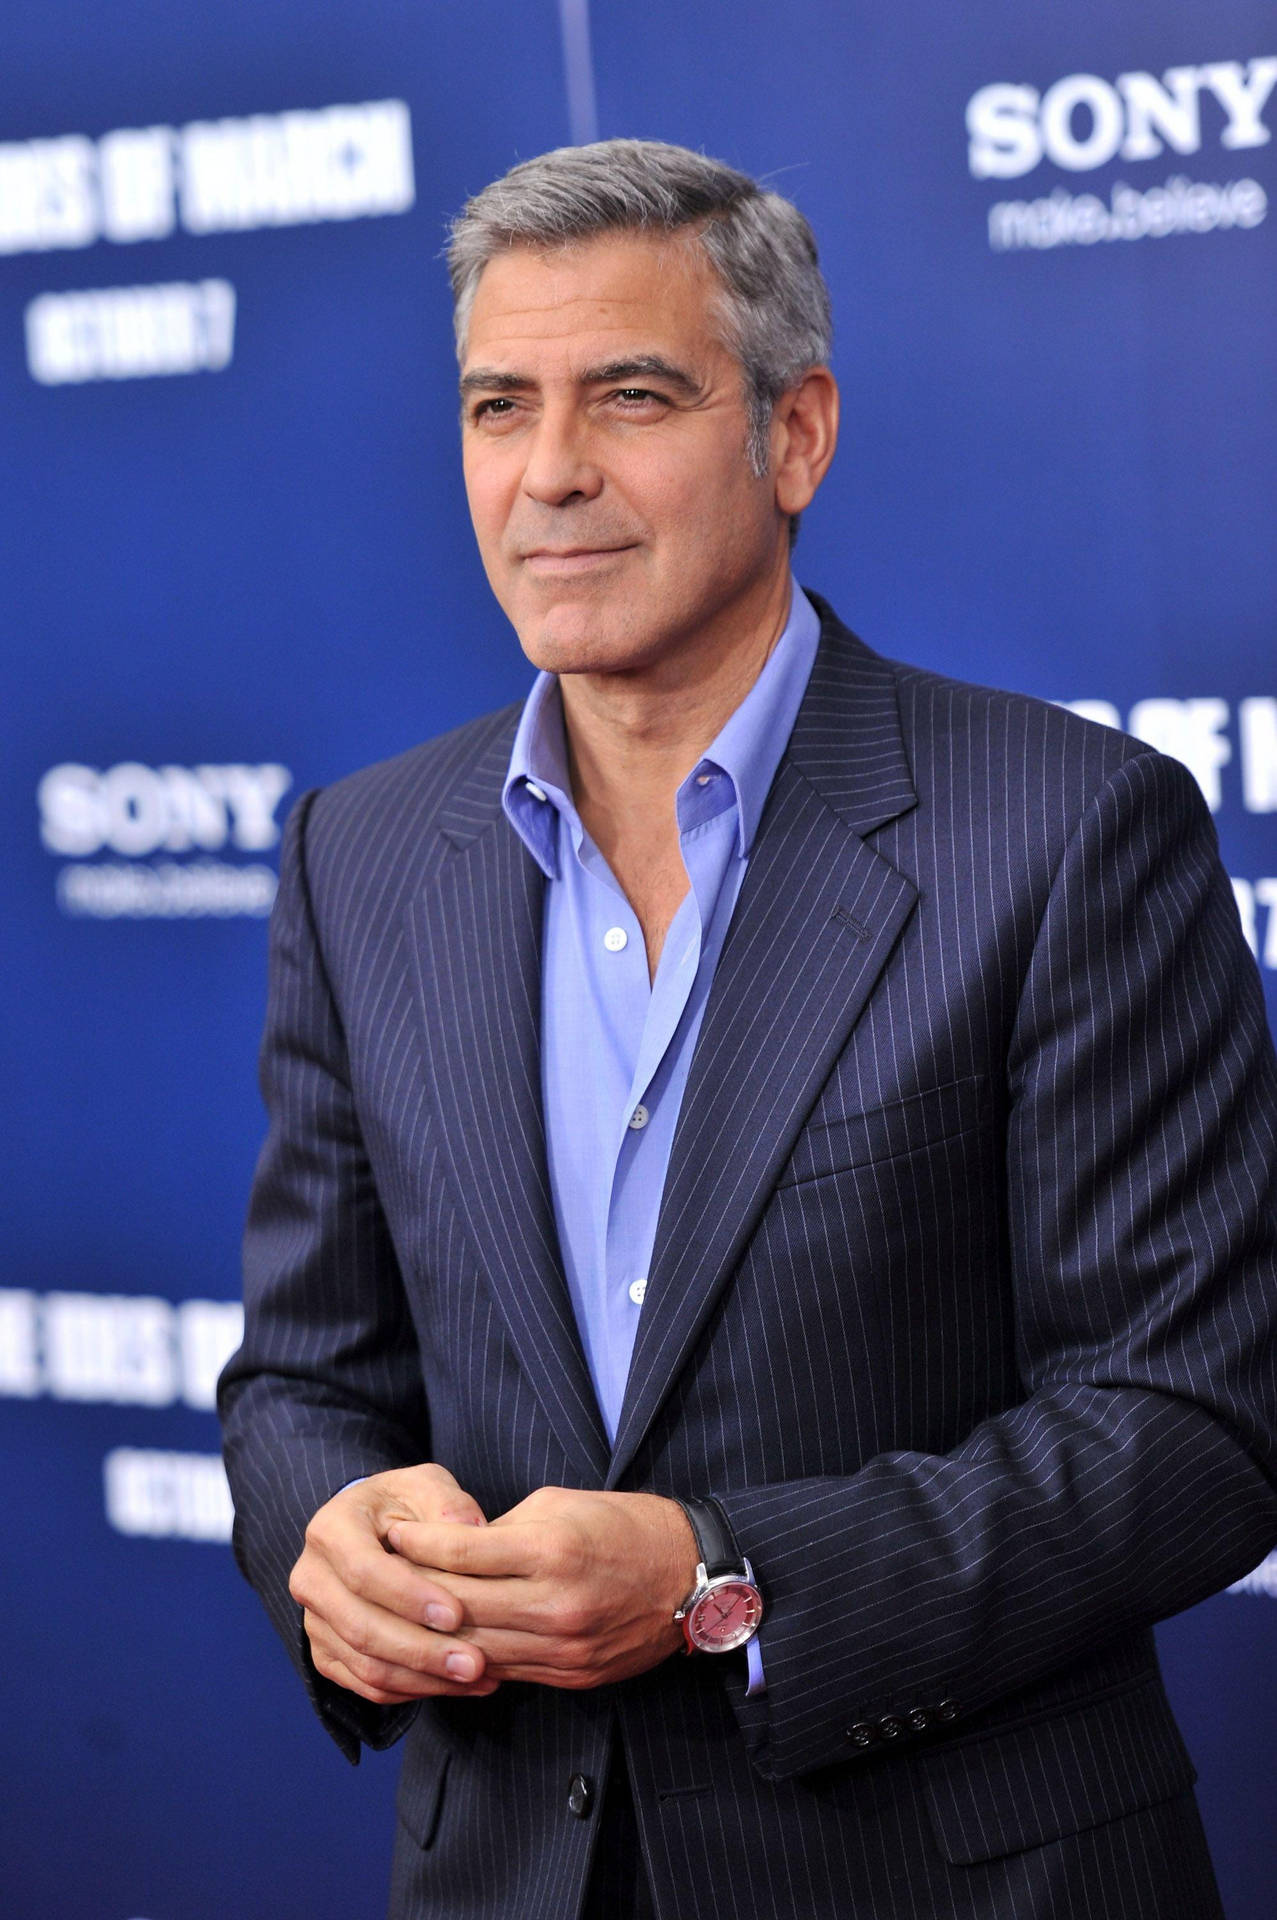 George Clooney The Ides Of March Premiere Wallpaper